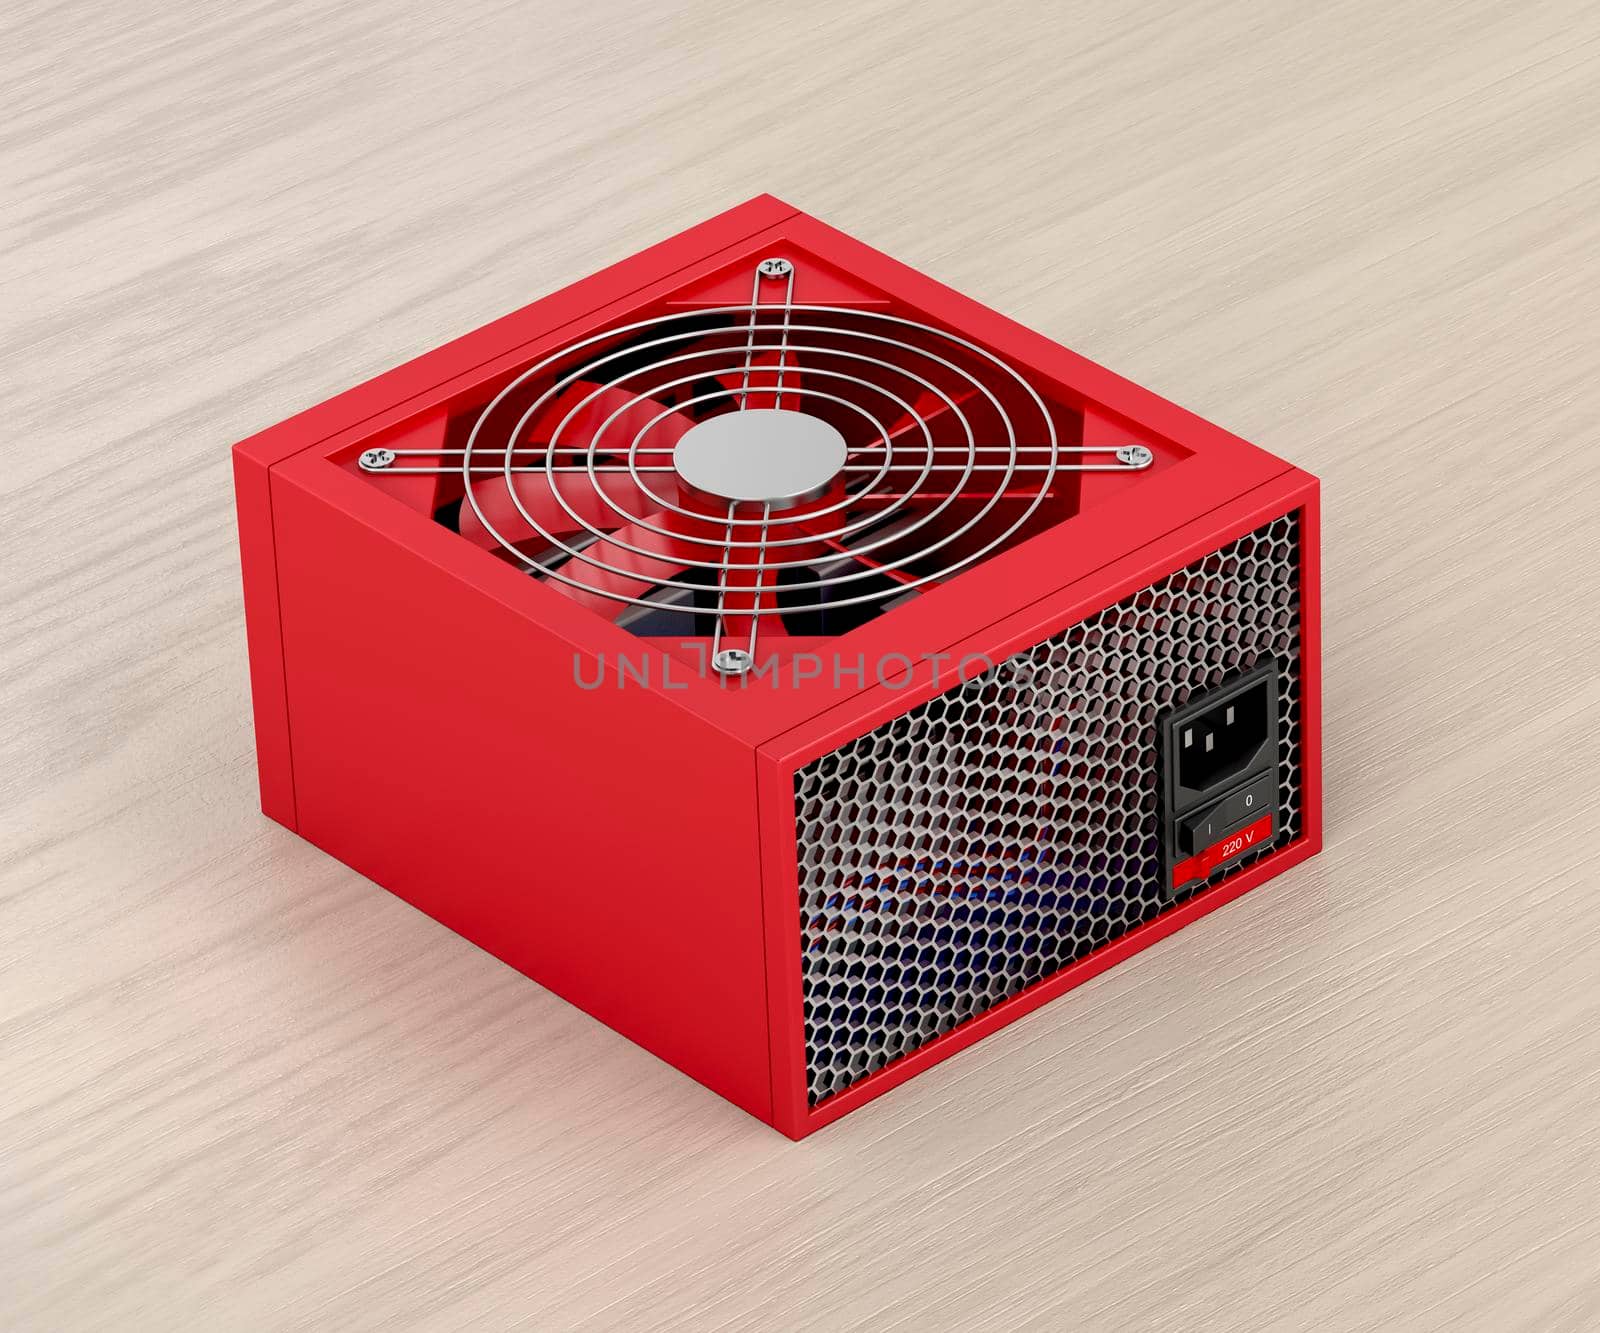 Red power supply unit (PSU) for computer on wooden desk